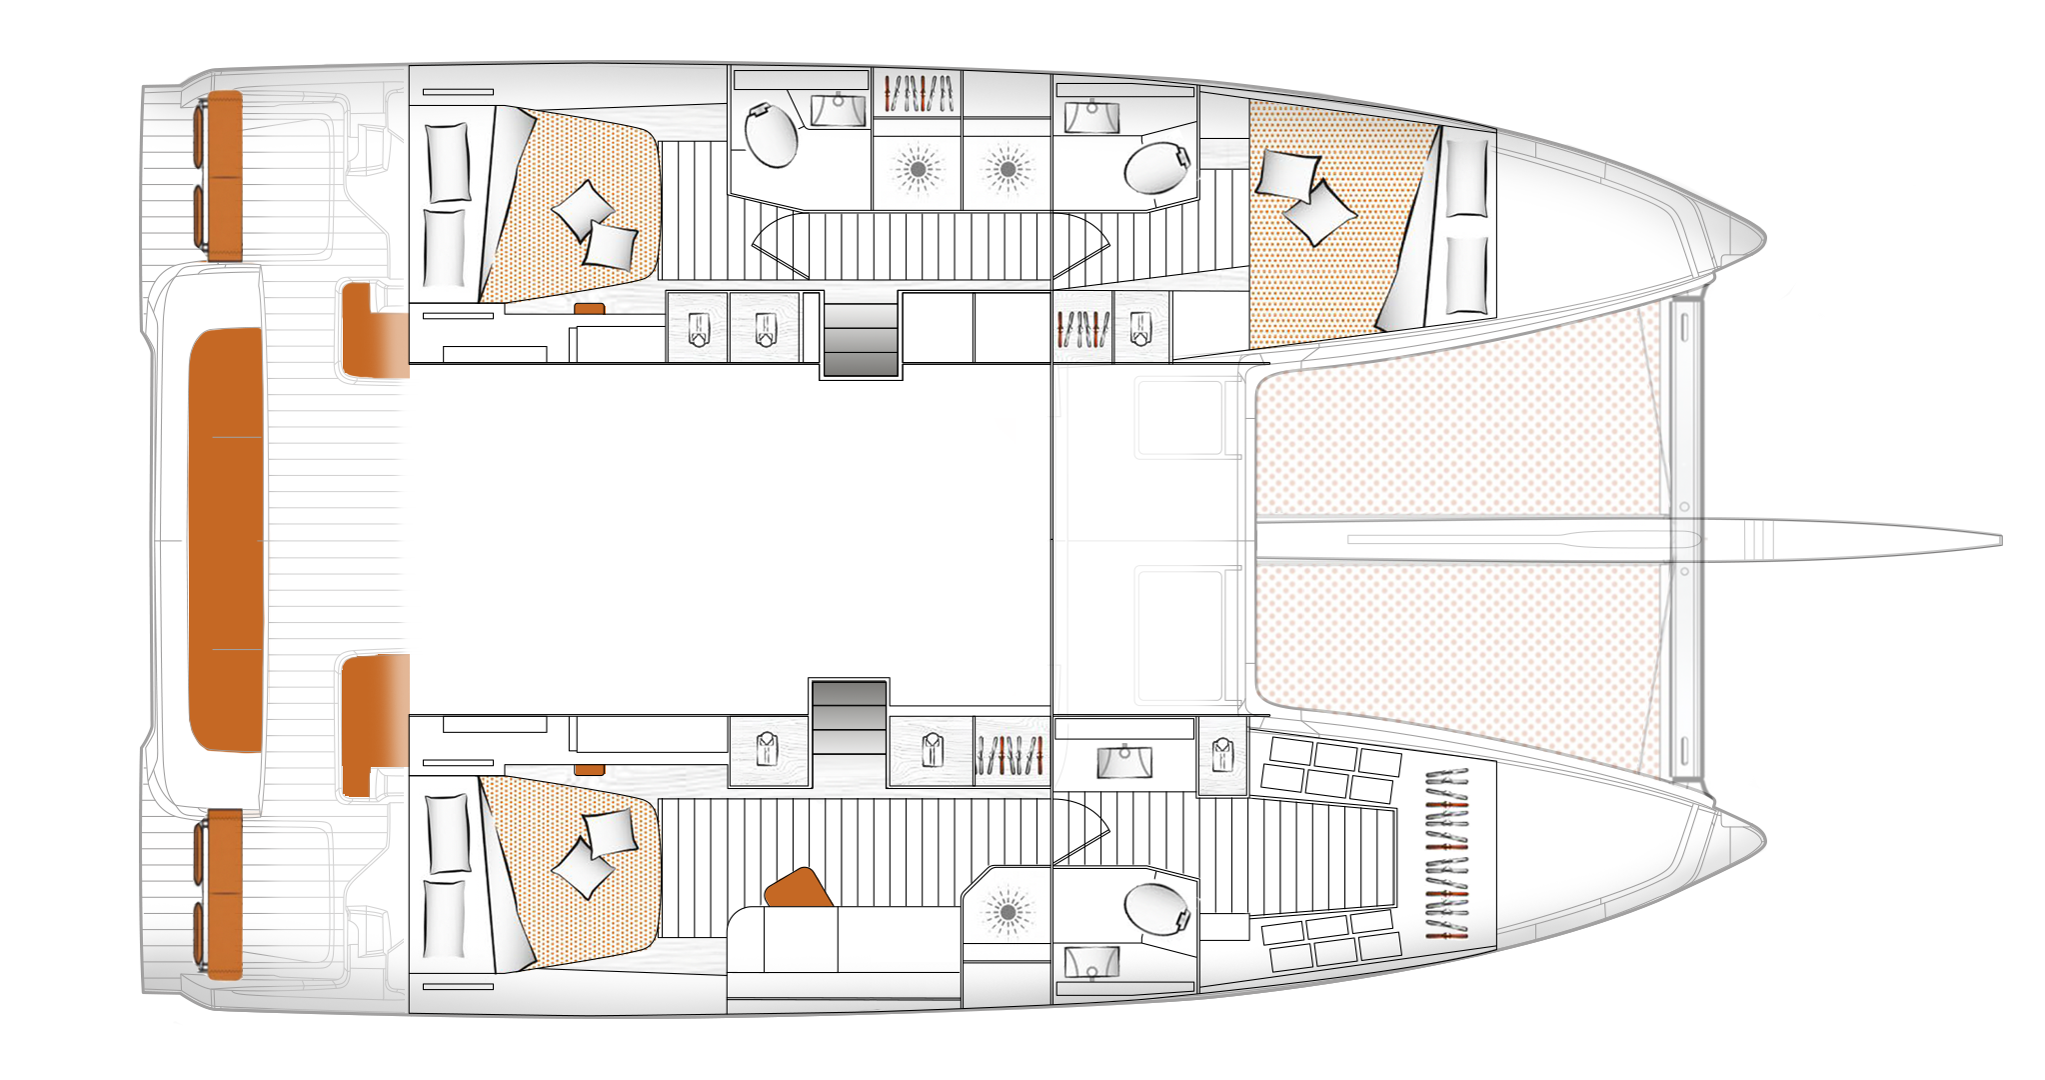 Excess 14 3 Cabin Layout With Walk-in Closet